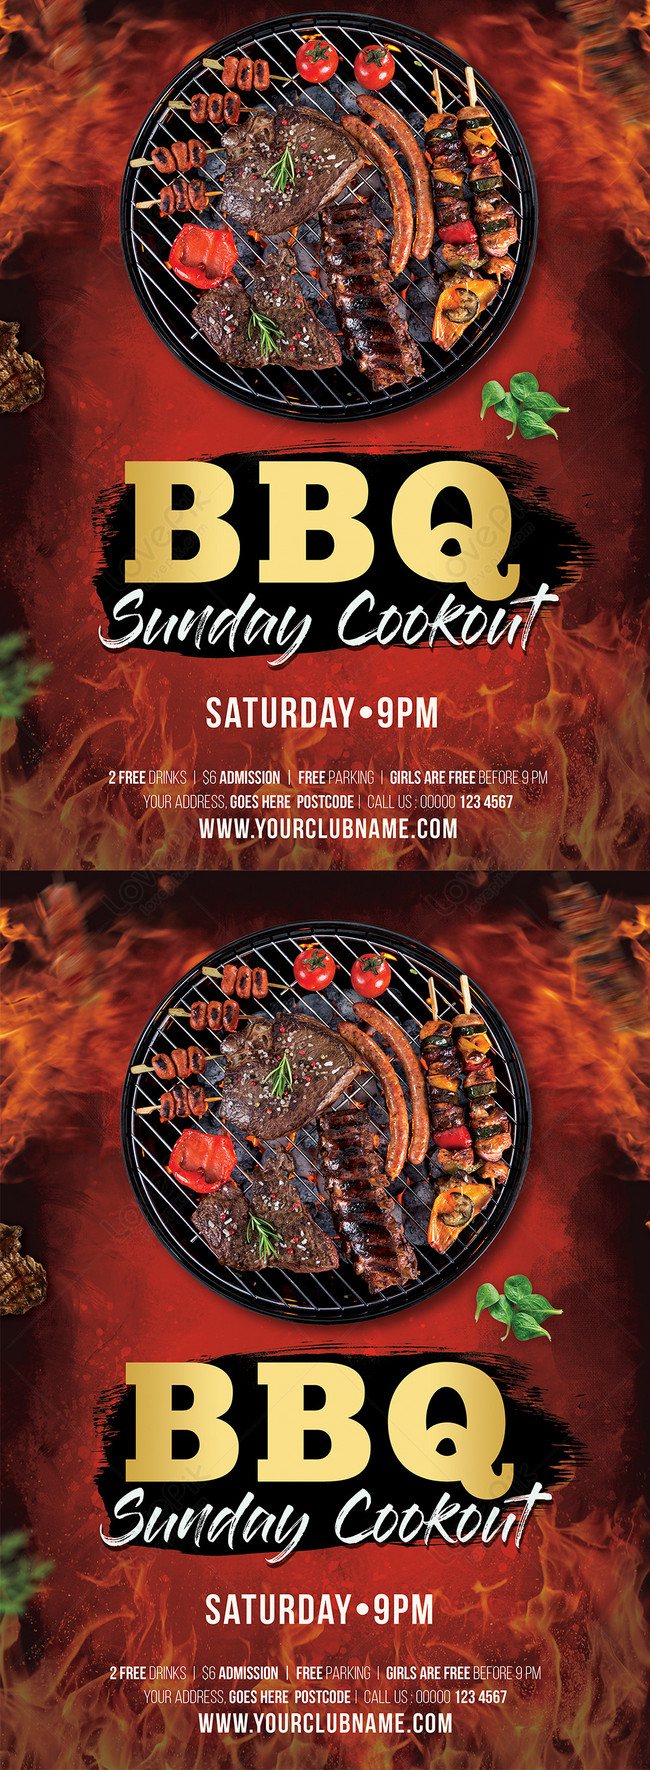 Bbq sunday cookout flyer template image_picture free download Intended For Cookout Flyer Template